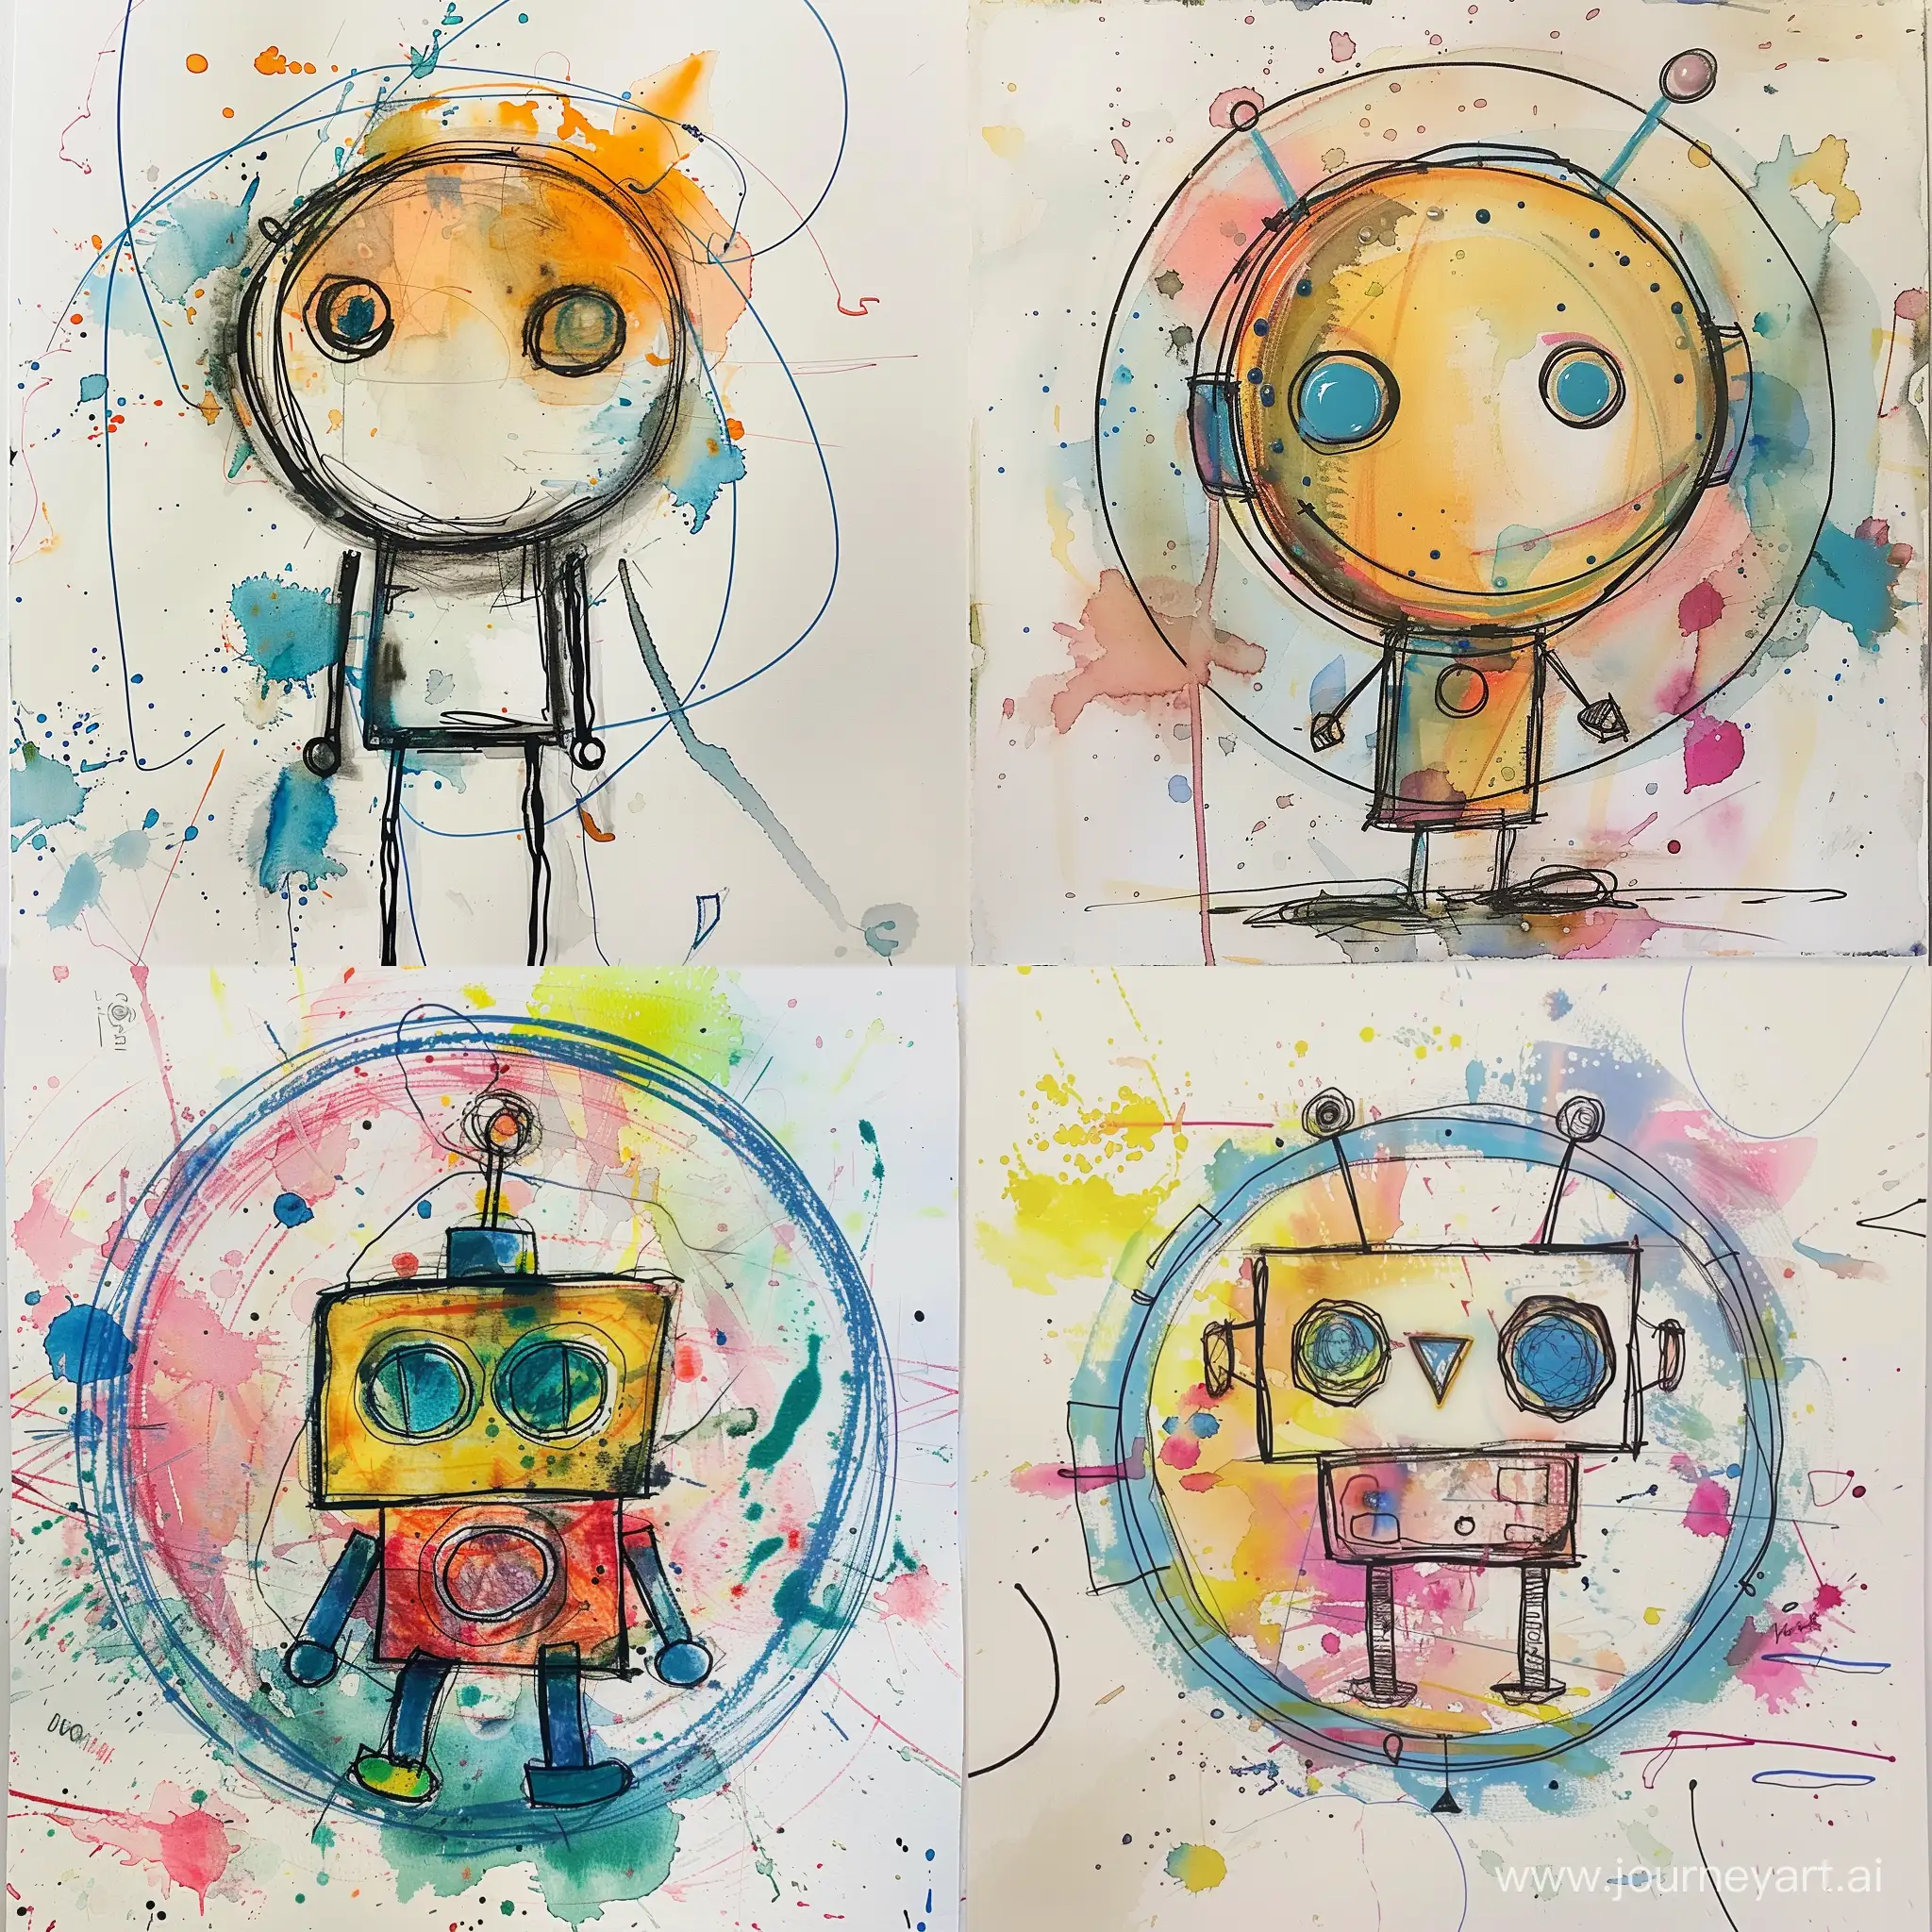 Whimsical-Robot-Drawing-by-a-5YearOld-Child-Vibrant-Acid-Art-Encaustic-Painting